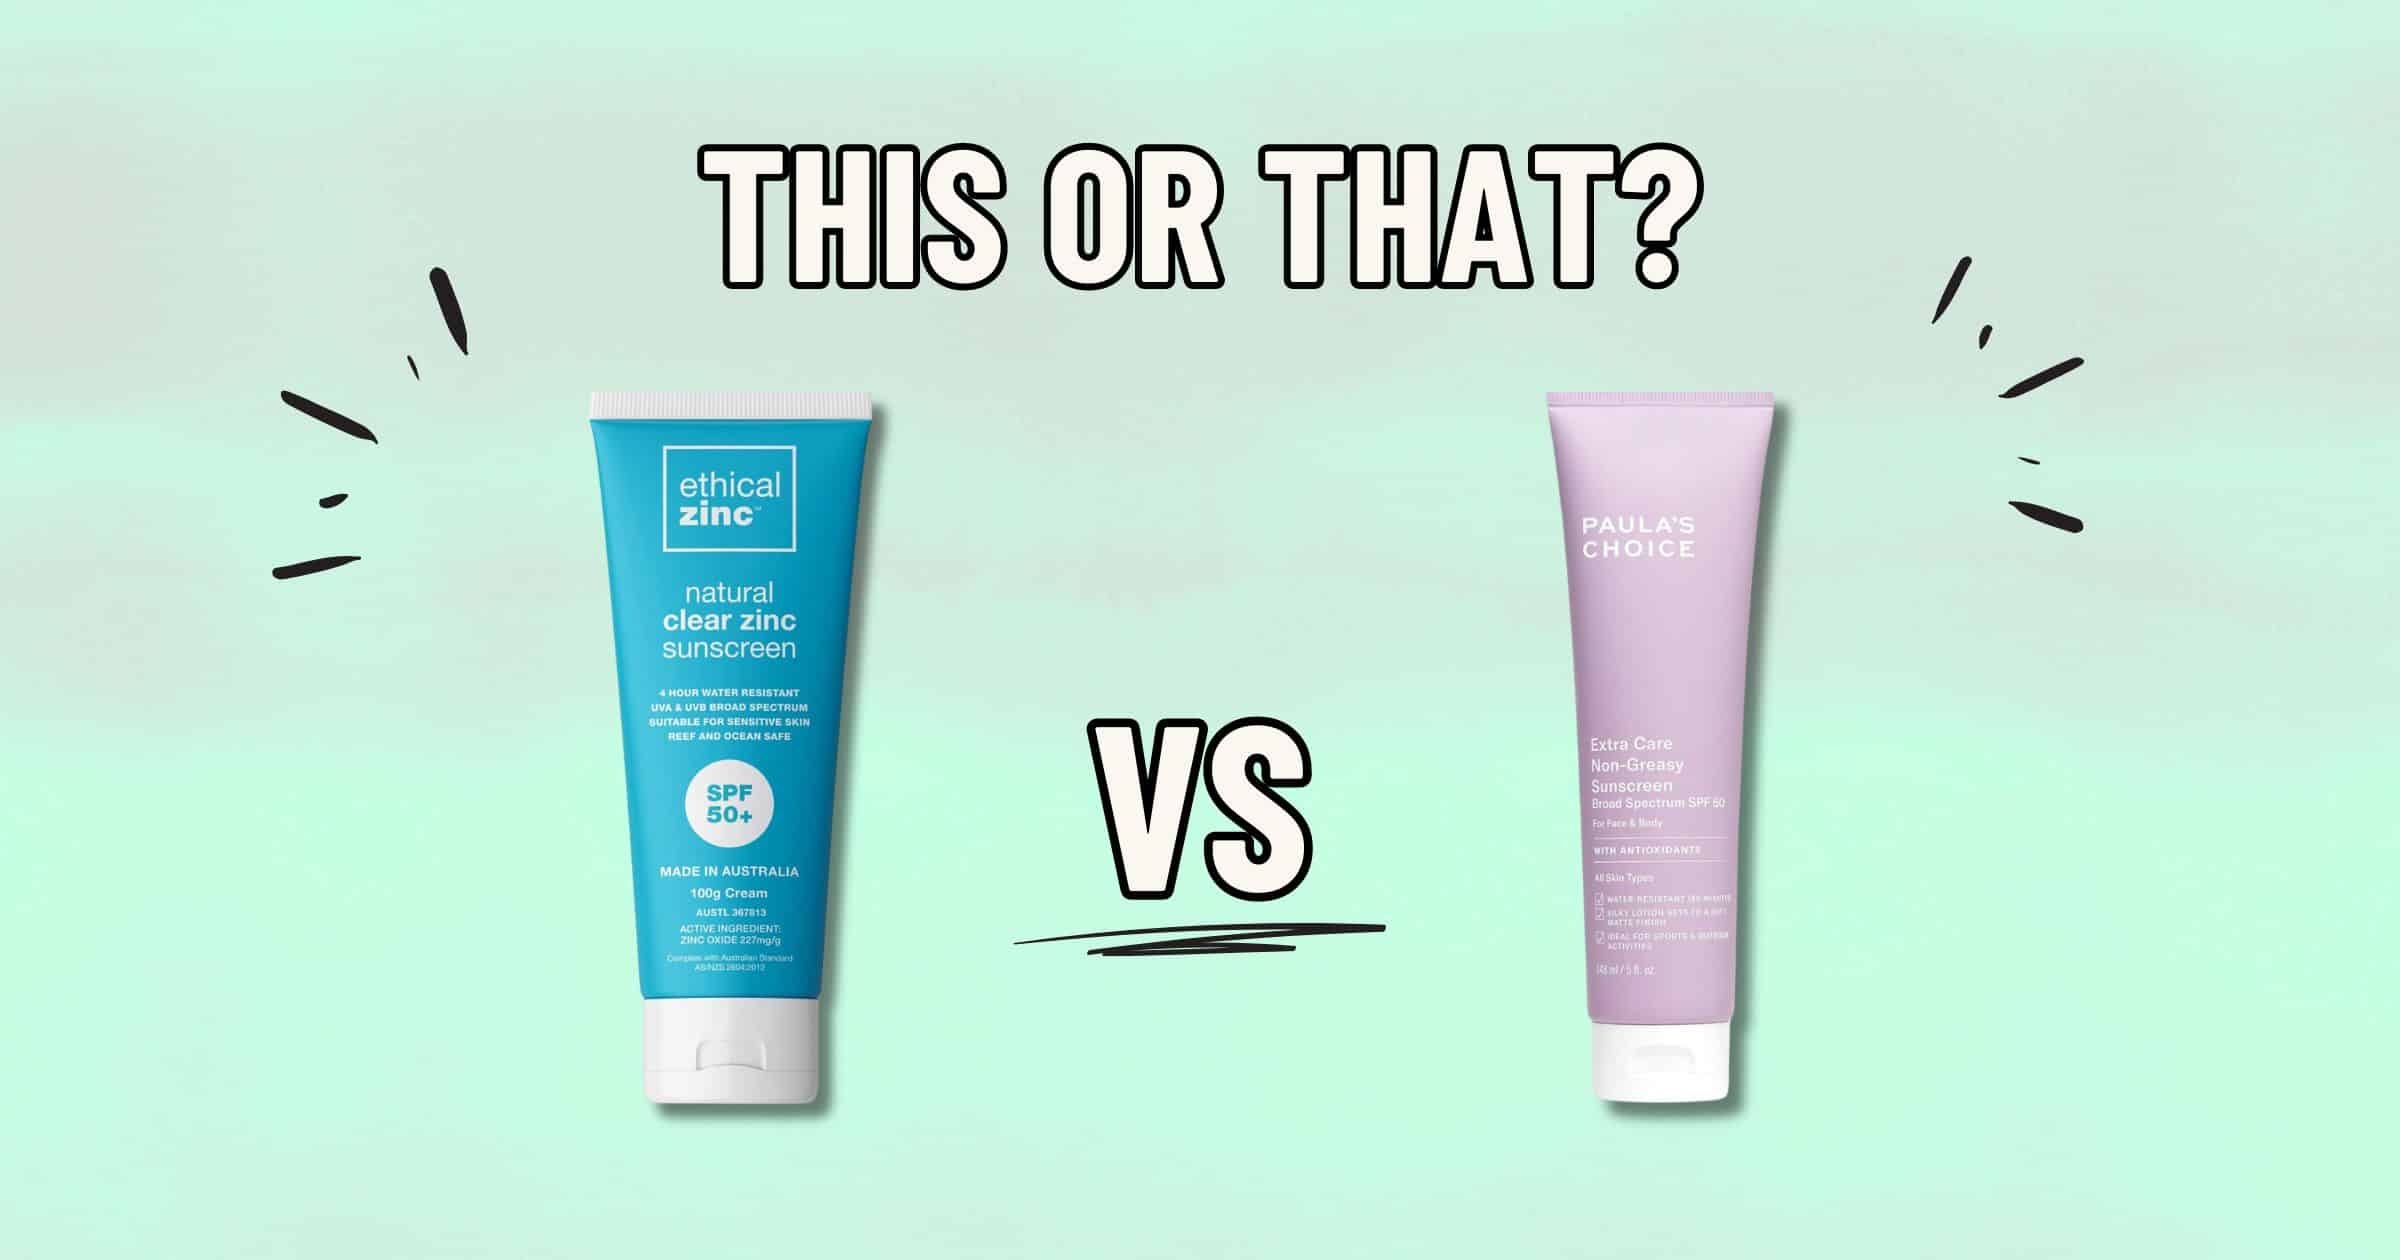 Comparison image of two skincare products titled "THIS OR THAT?". On the left, Ethical Zinc Natural Clear Zinc Sunscreen SPF 50+ (Physical Sunscreen). On the right, Paula's Choice Skin Care Super-Light Wrinkle Defense SPF 30 (Chemical Sunscreen). The background is light green. Which one is healthier for your skin?